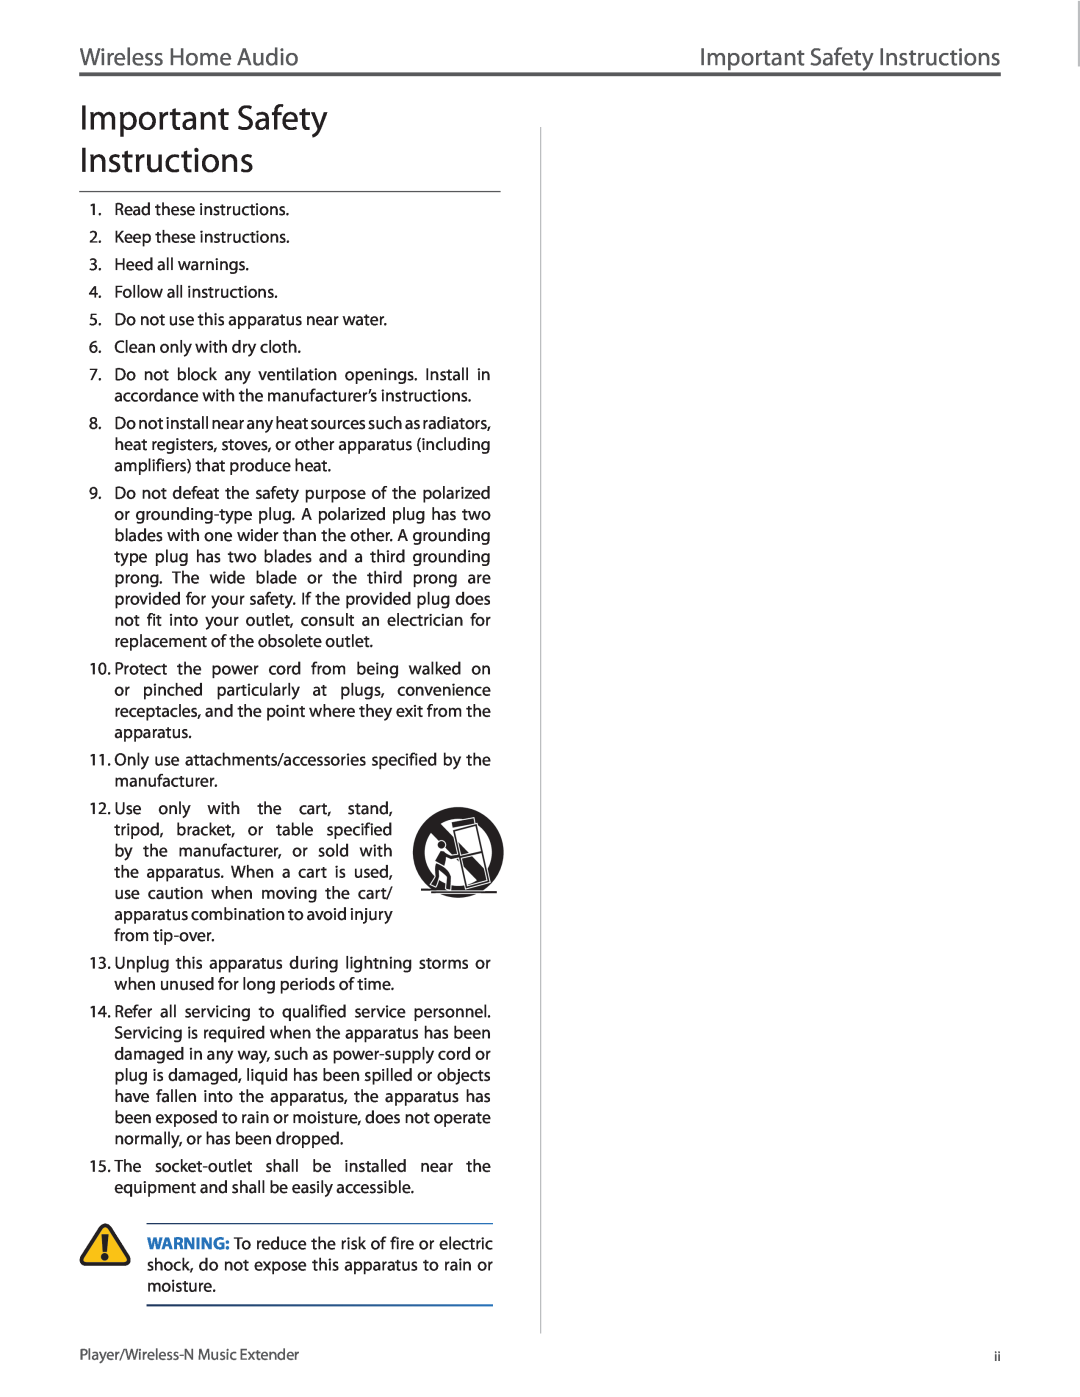 Linksys DMP100 manual Important Safety Instructions, Wireless Home Audio 